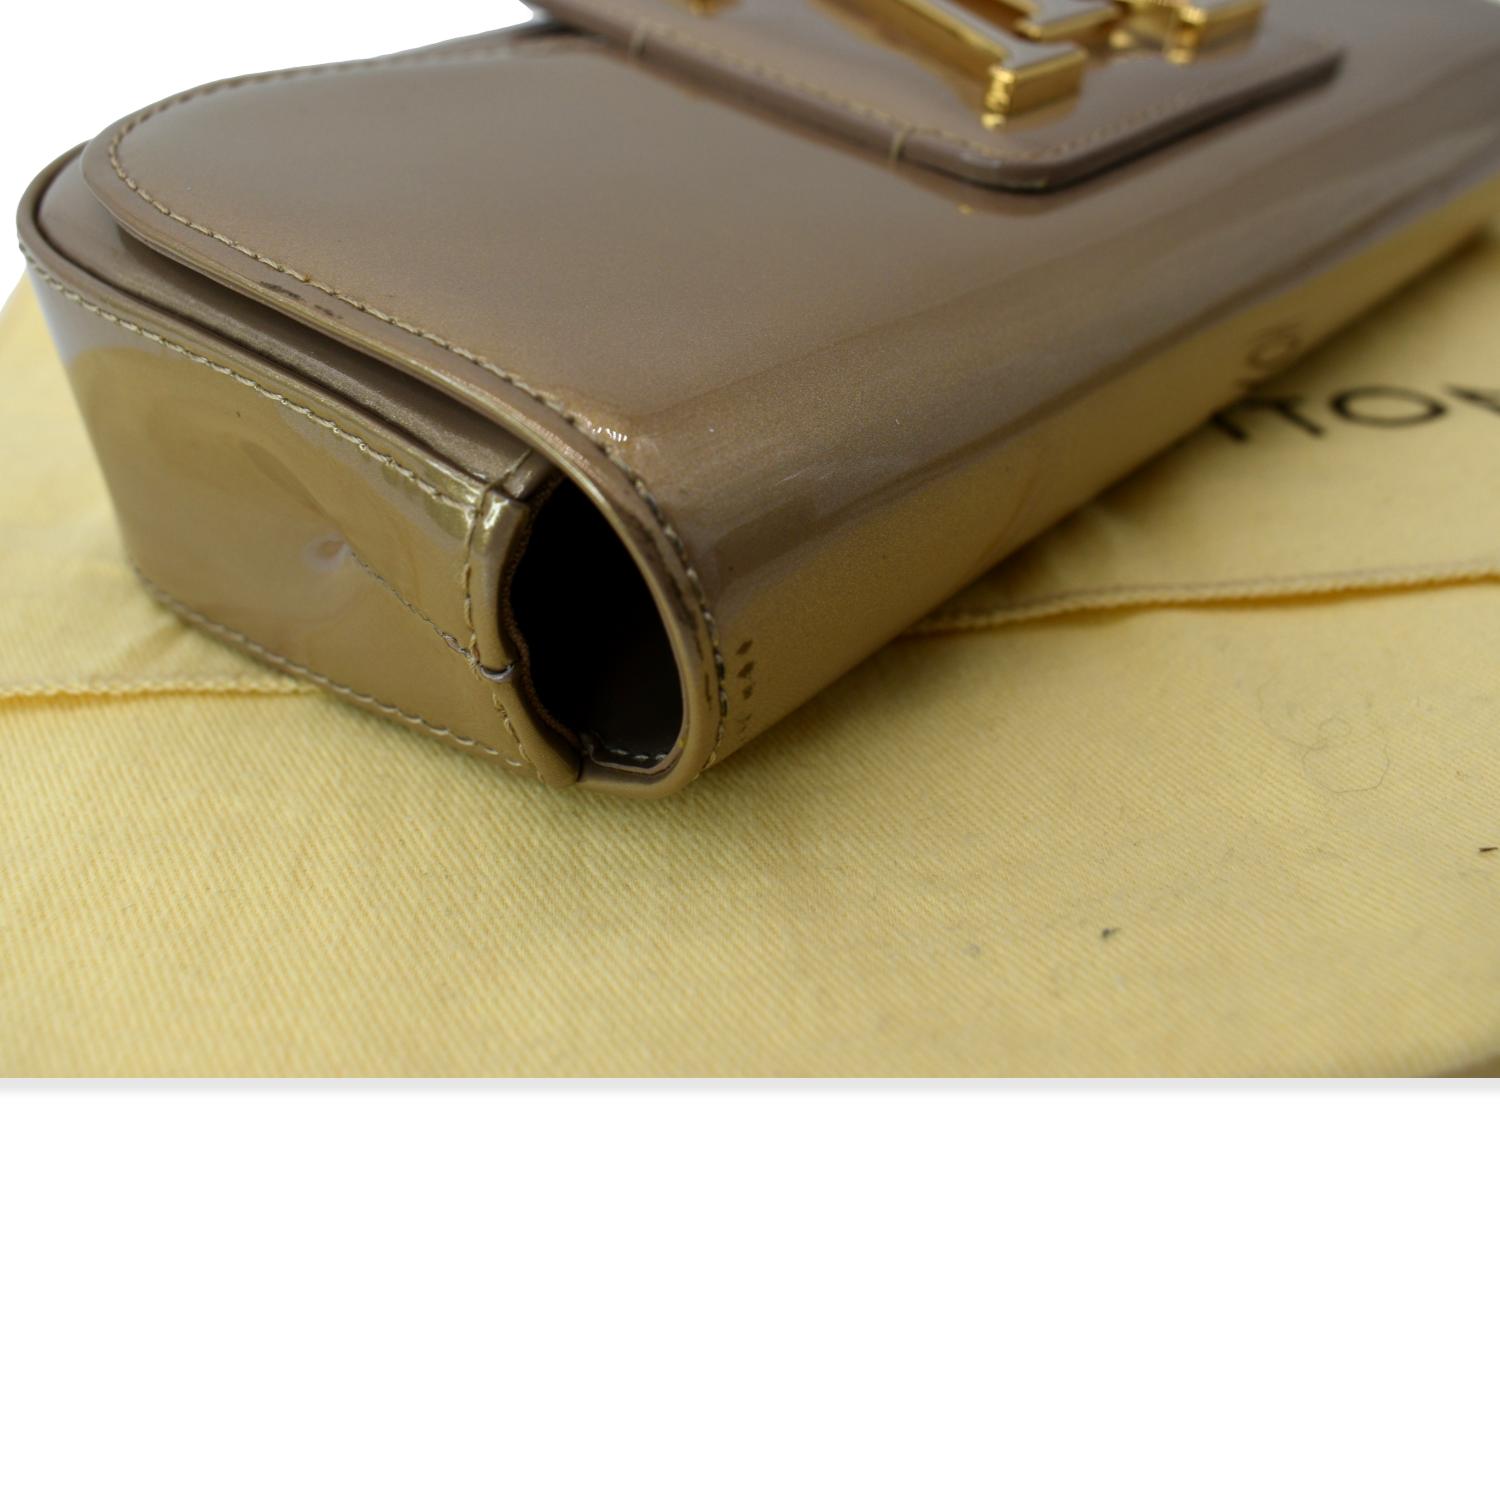 Louis Vuitton - Authenticated Sobe Clutch Bag - Leather Beige Plain for Women, Very Good Condition